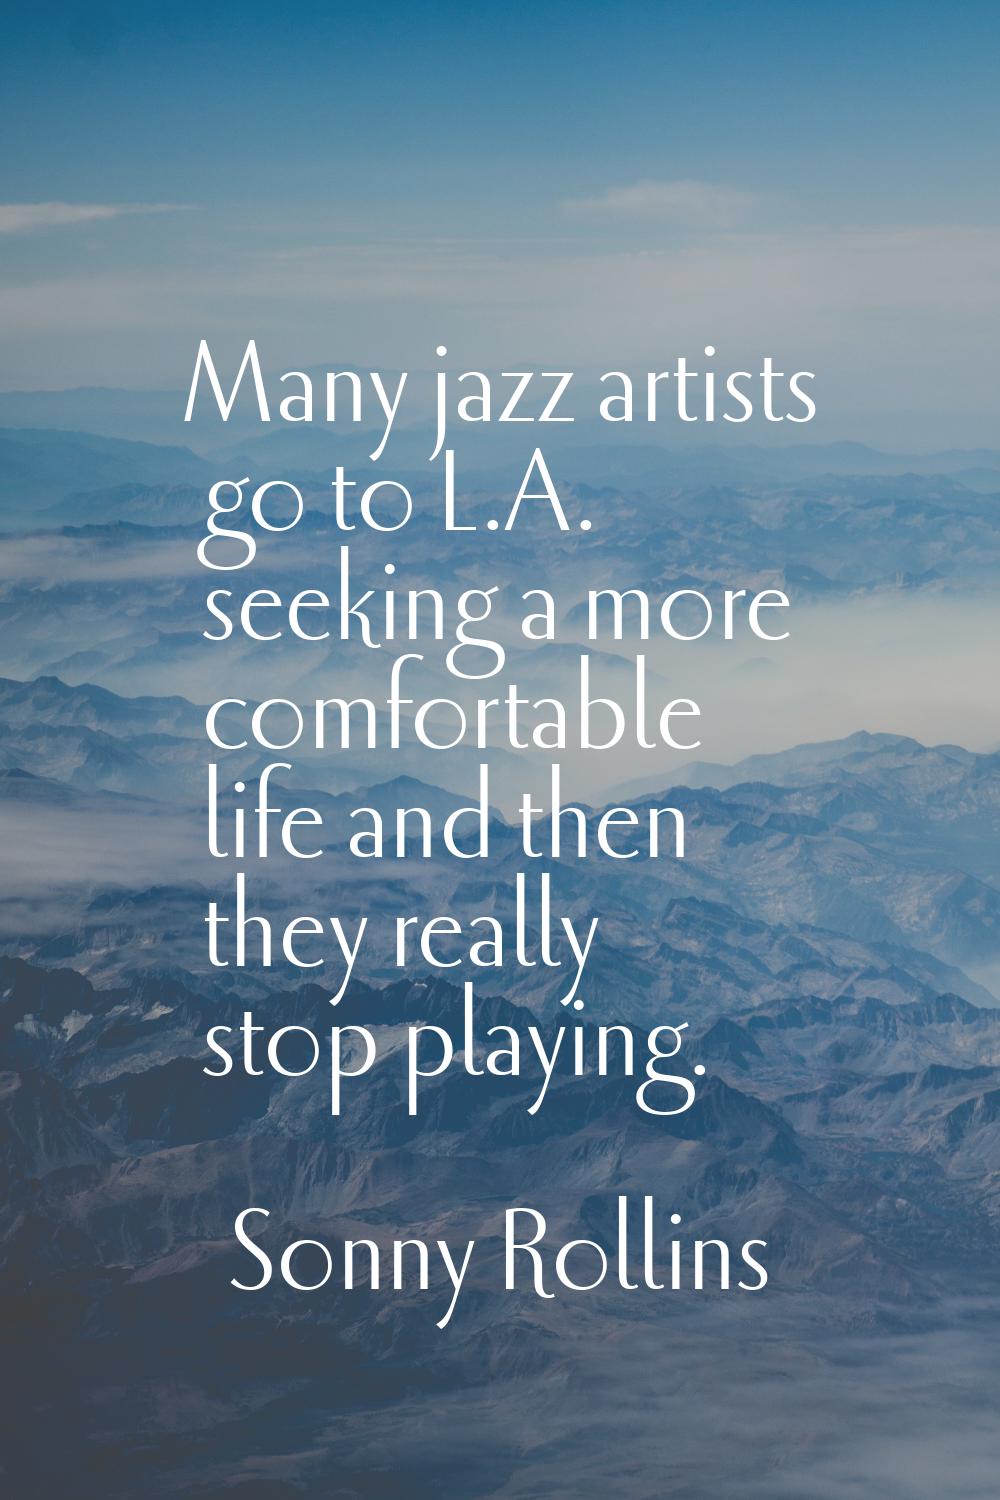 Many jazz artists go to L.A. seeking a more comfortable life and then they really stop playing.